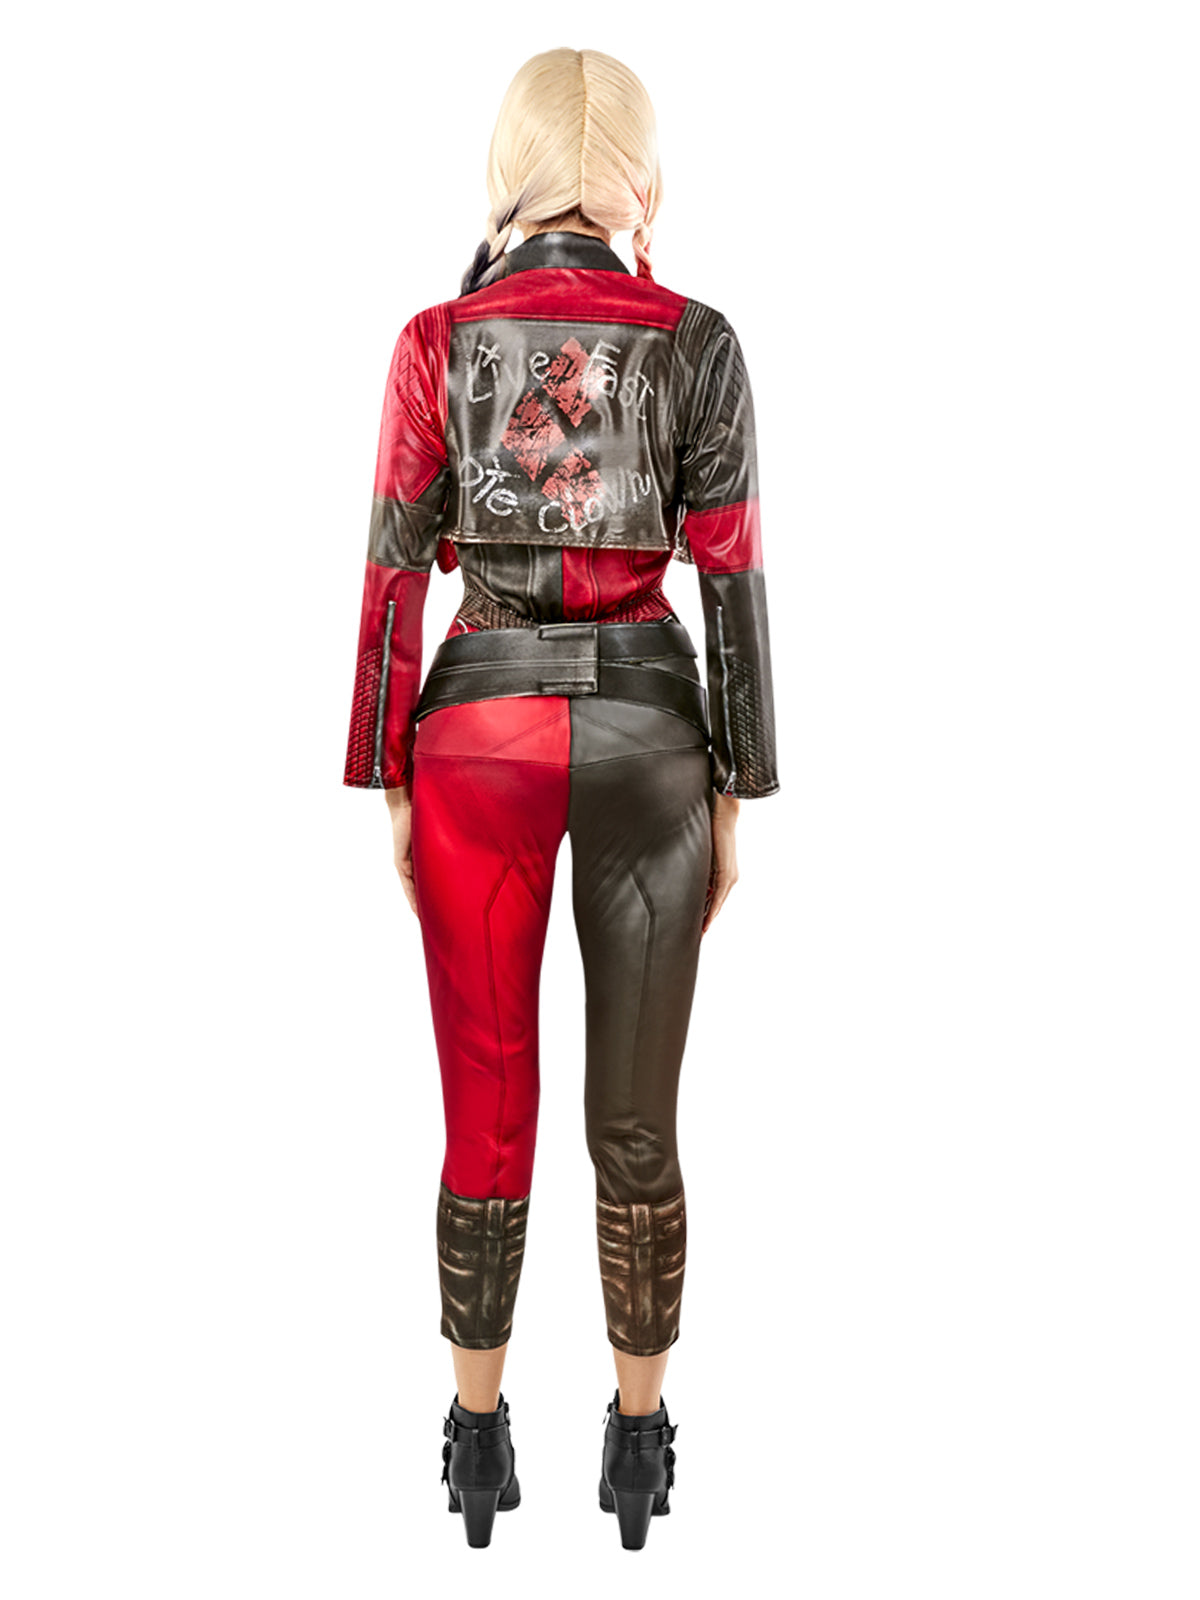 The Suicide Squad Harley Quinn Costume